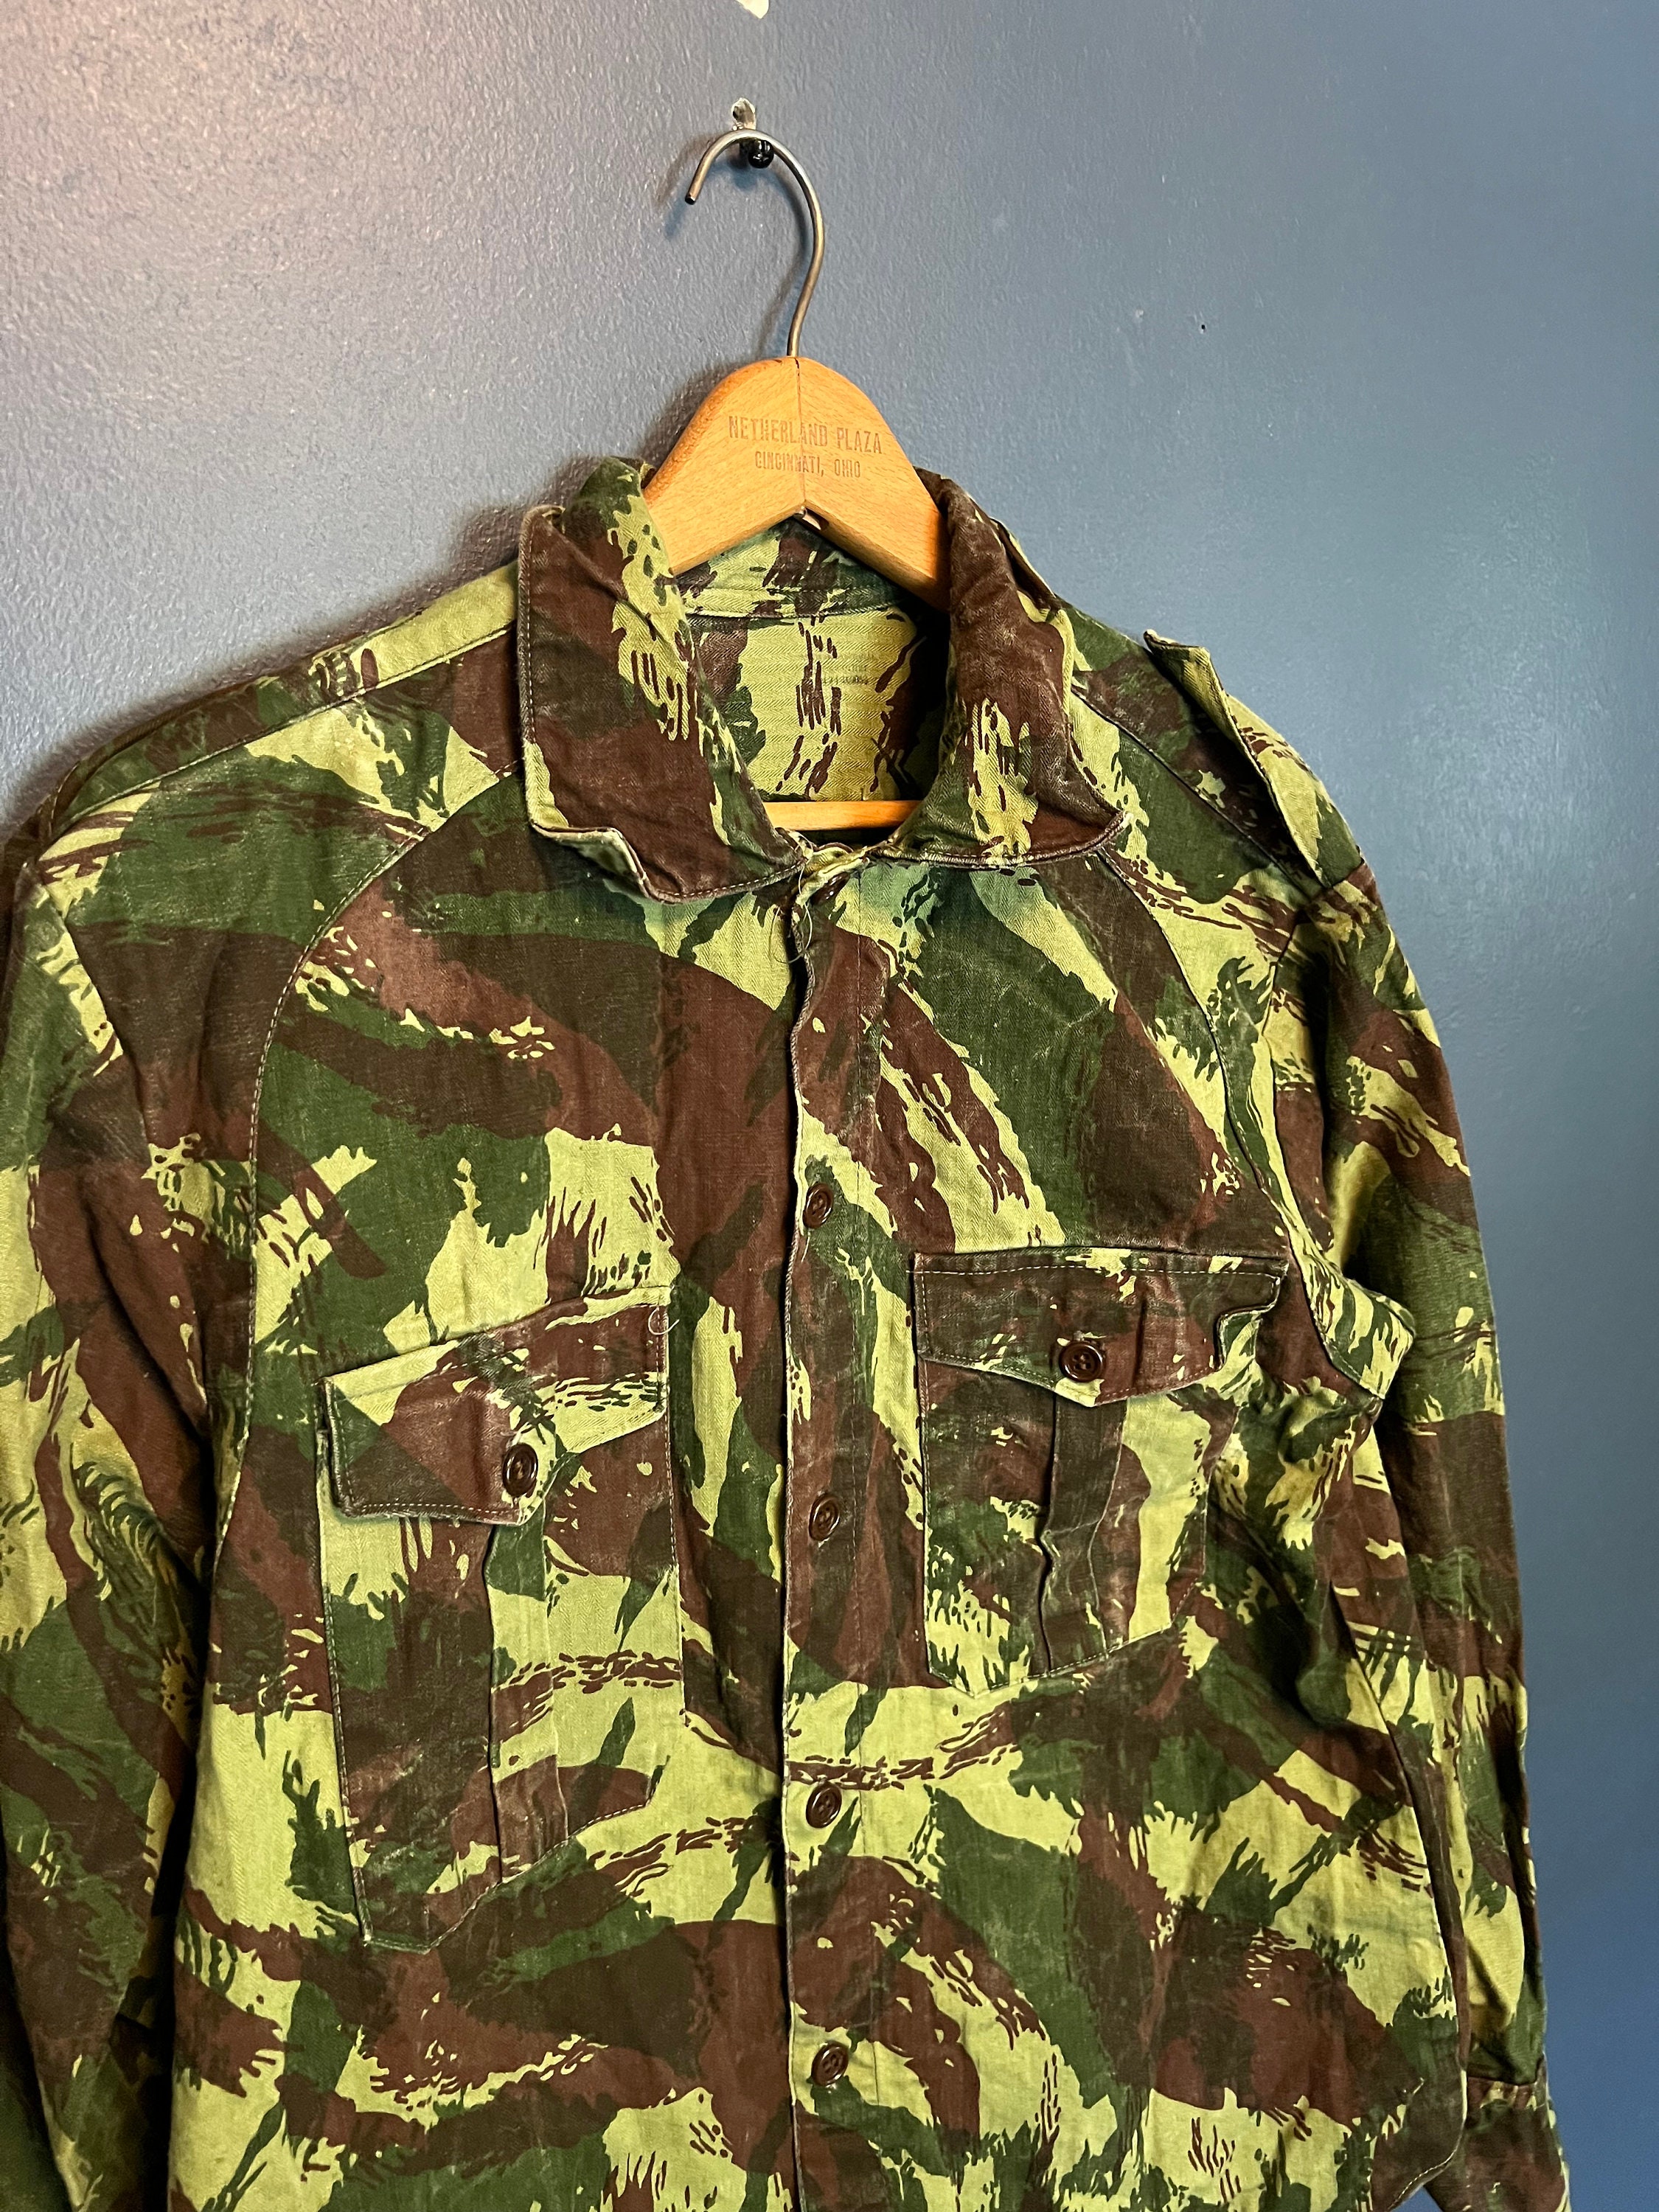 Yydgh Men's Camouflage Denim Shirt Camo Washed Military Long Sleeve Shirts Button Down Hunting Printed Cargo Shirt Tops(Army Green,L), Size: Large